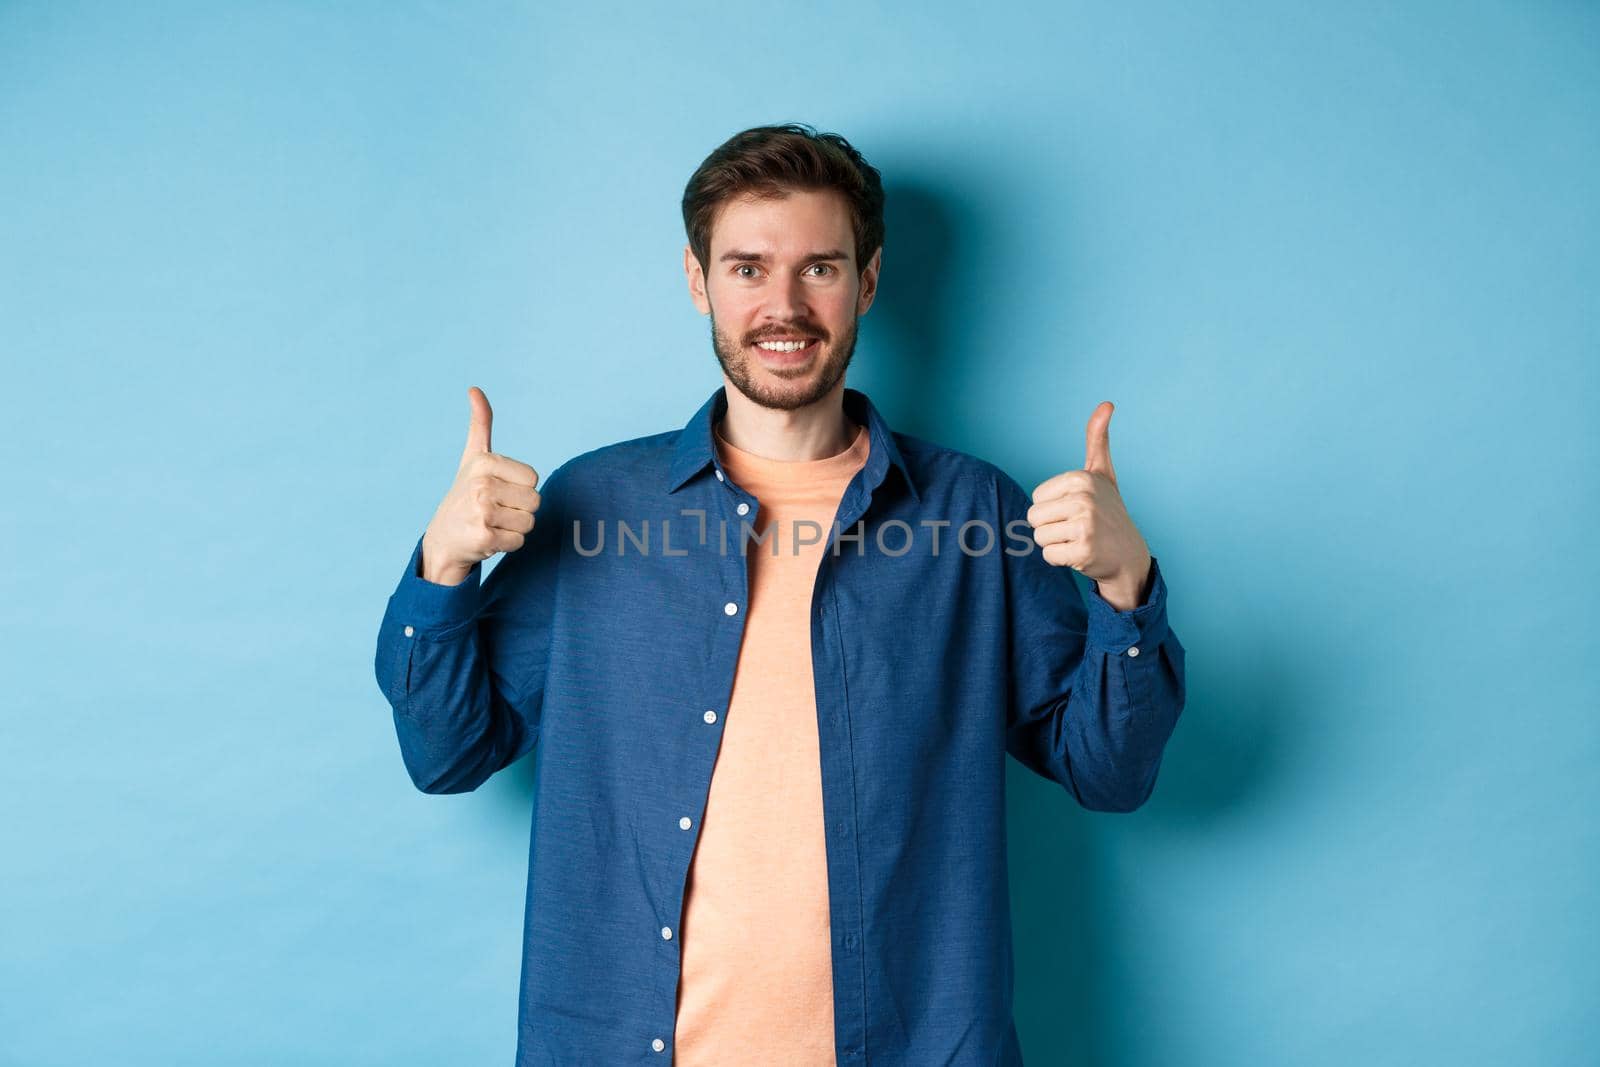 Handsome smiling man being supportive, showing thumbs up in approval, praise good work, standing happy on blue background.